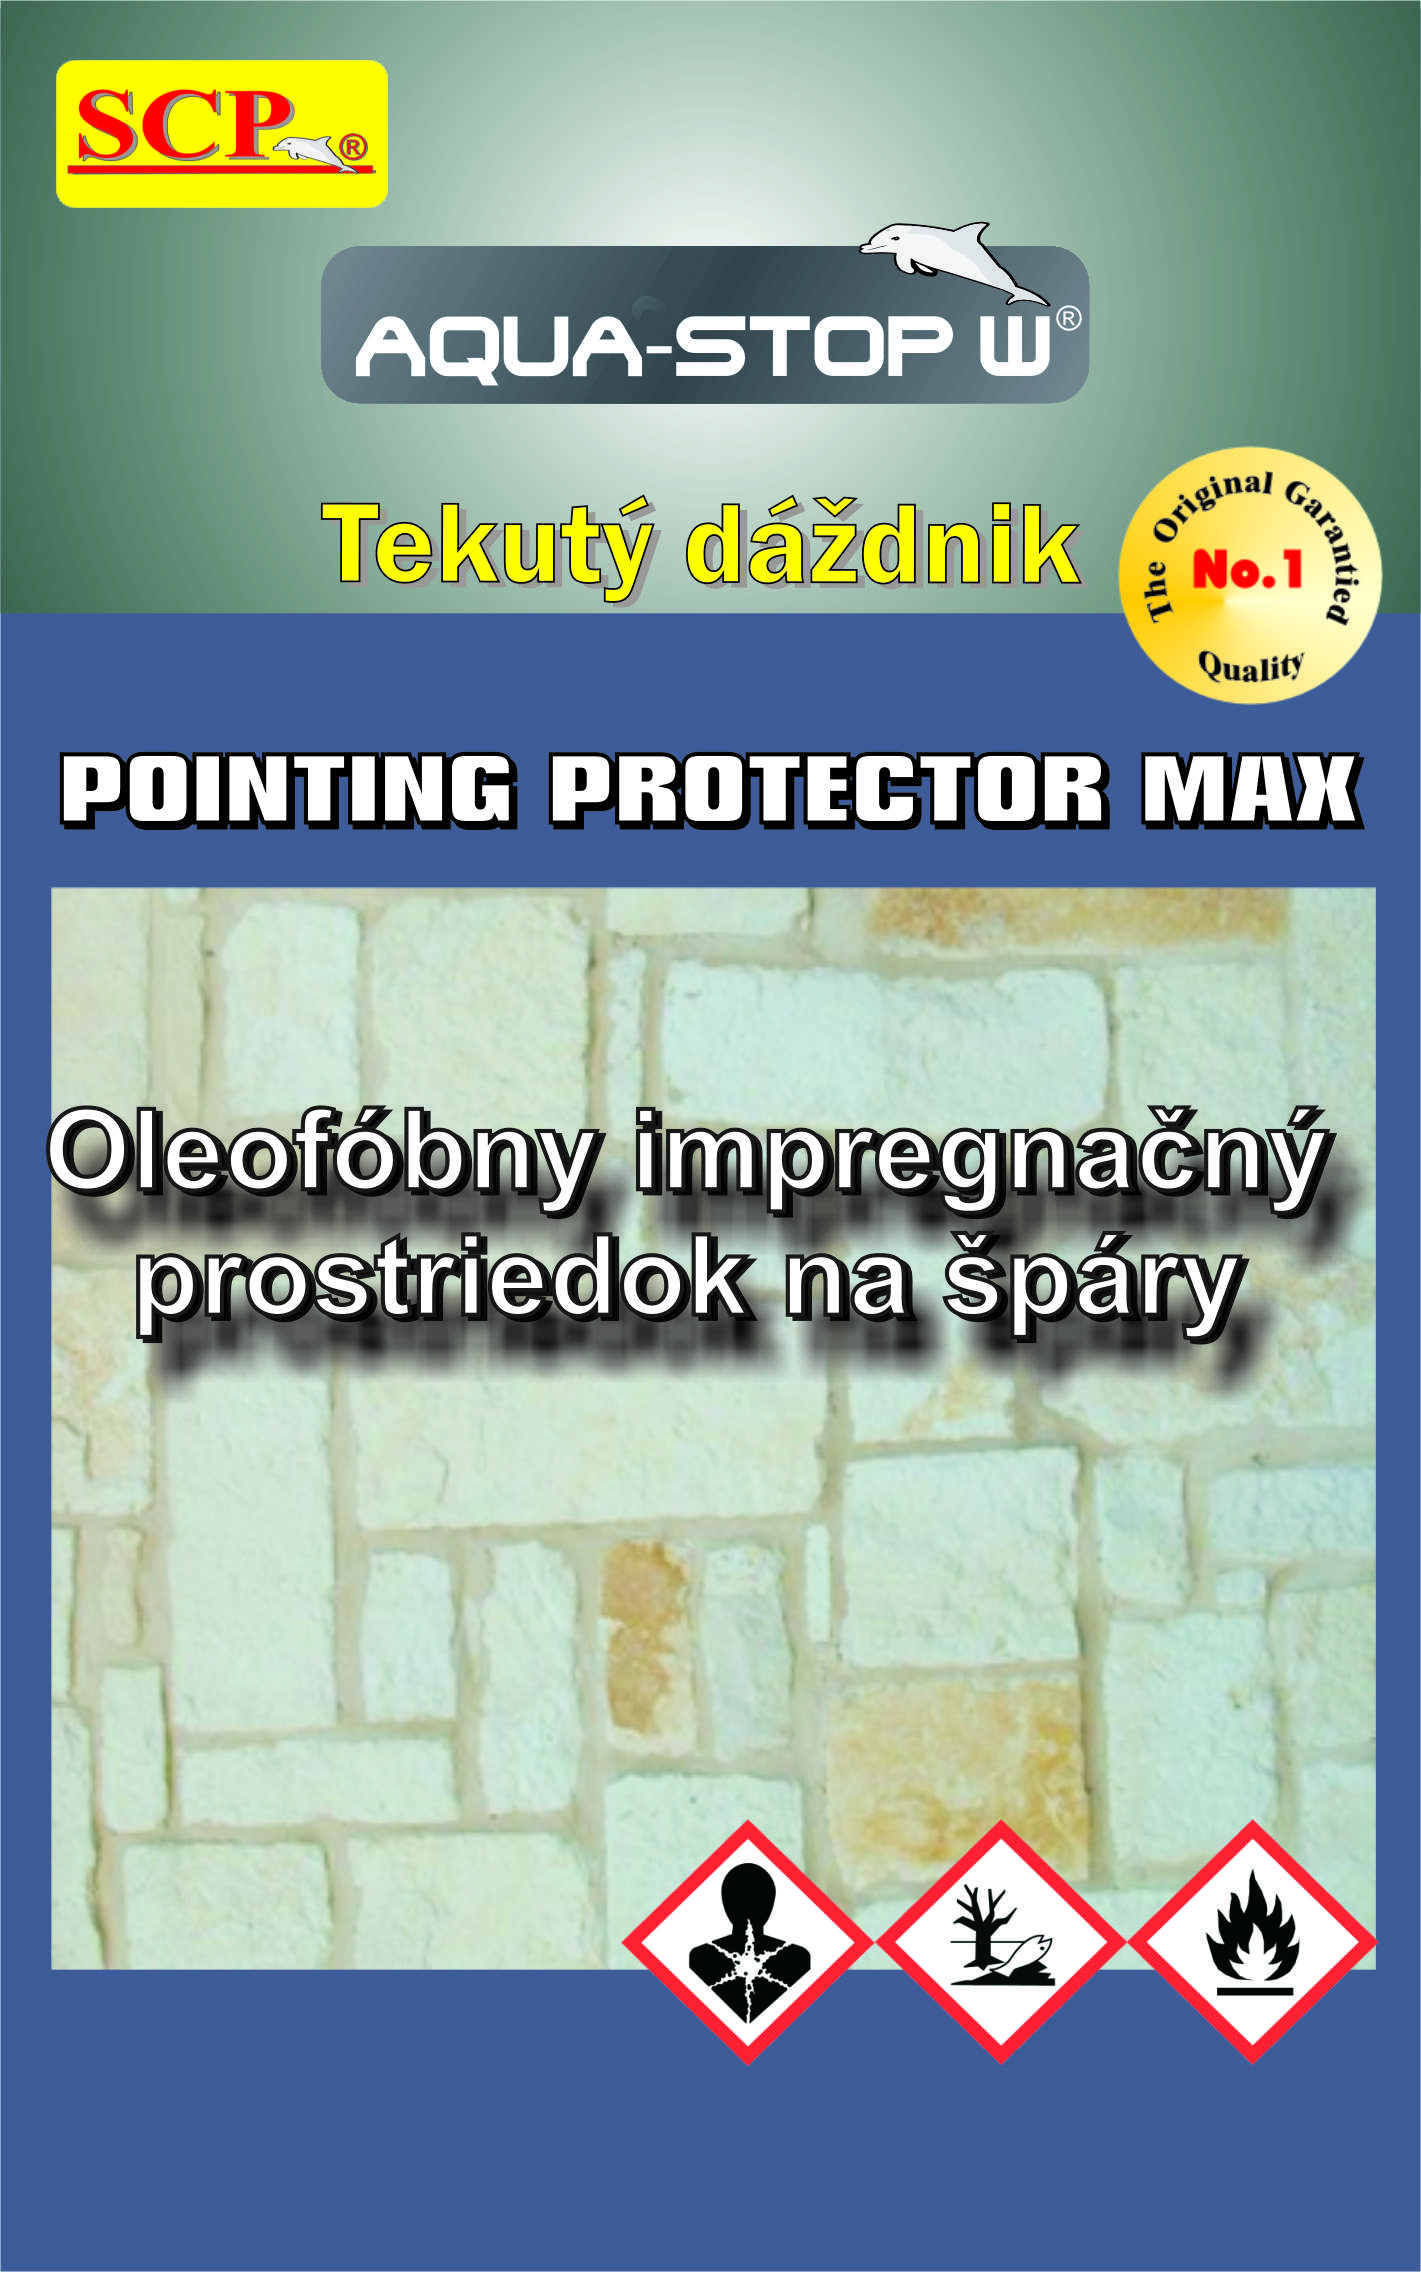 Pointing Protector Max